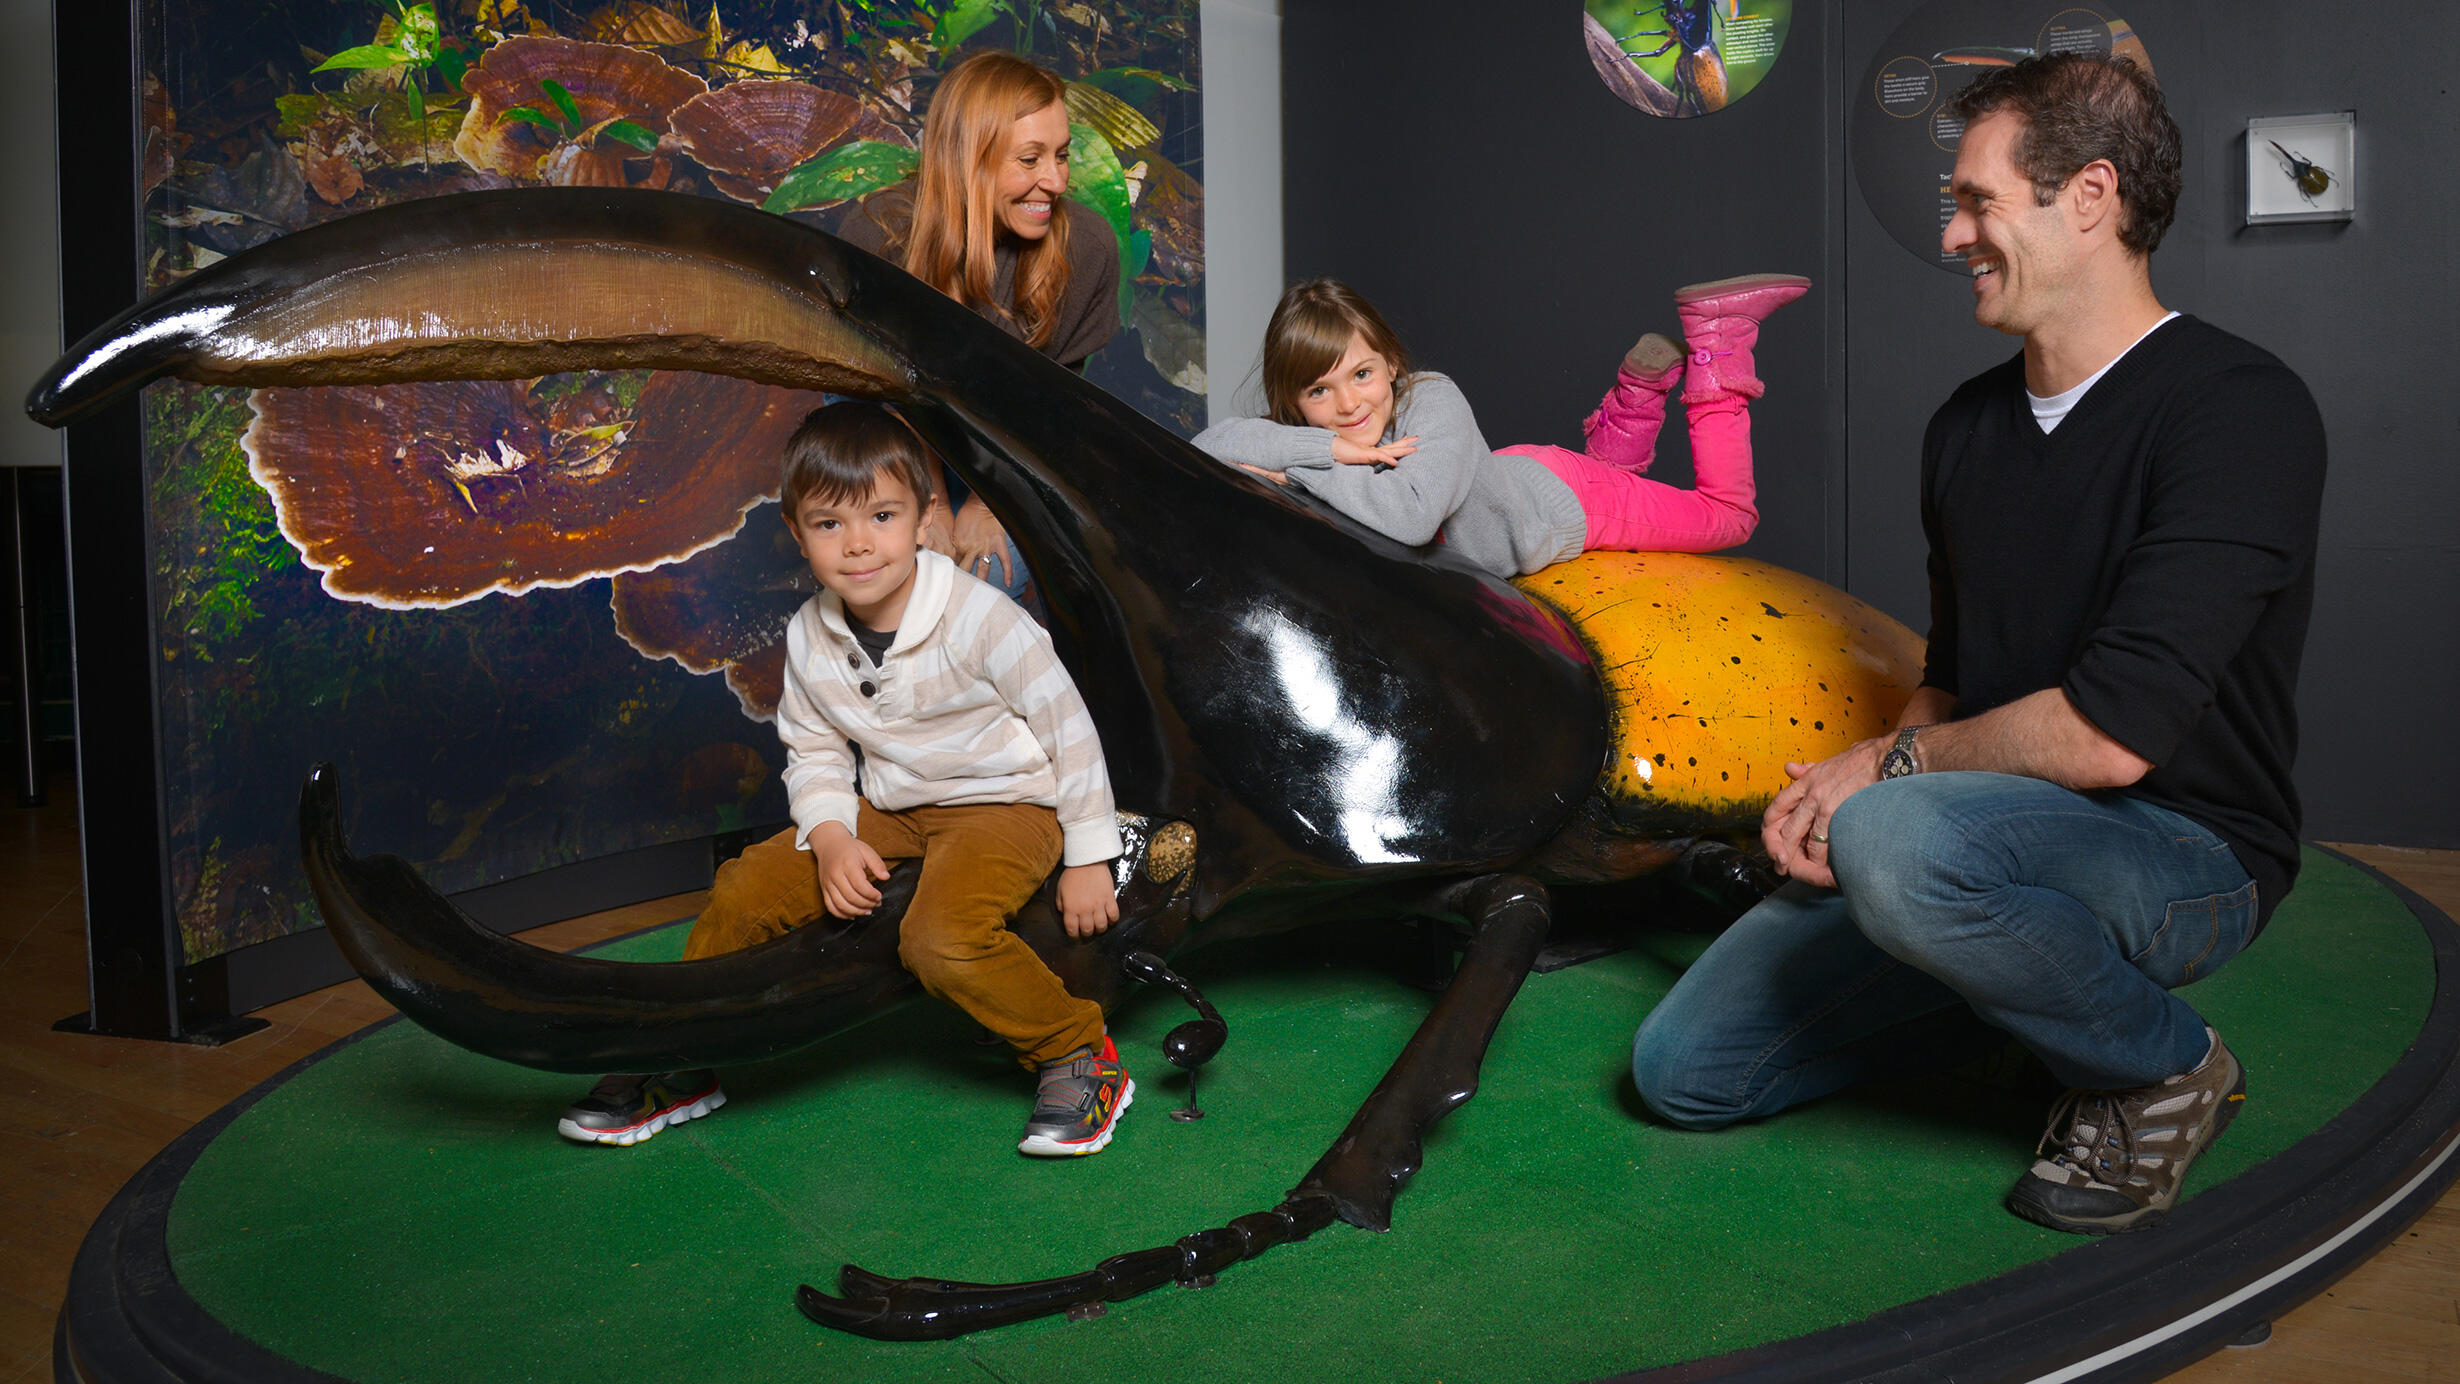 A young boy and girl climbing on a giant model of a hercules beetle while their parents watch